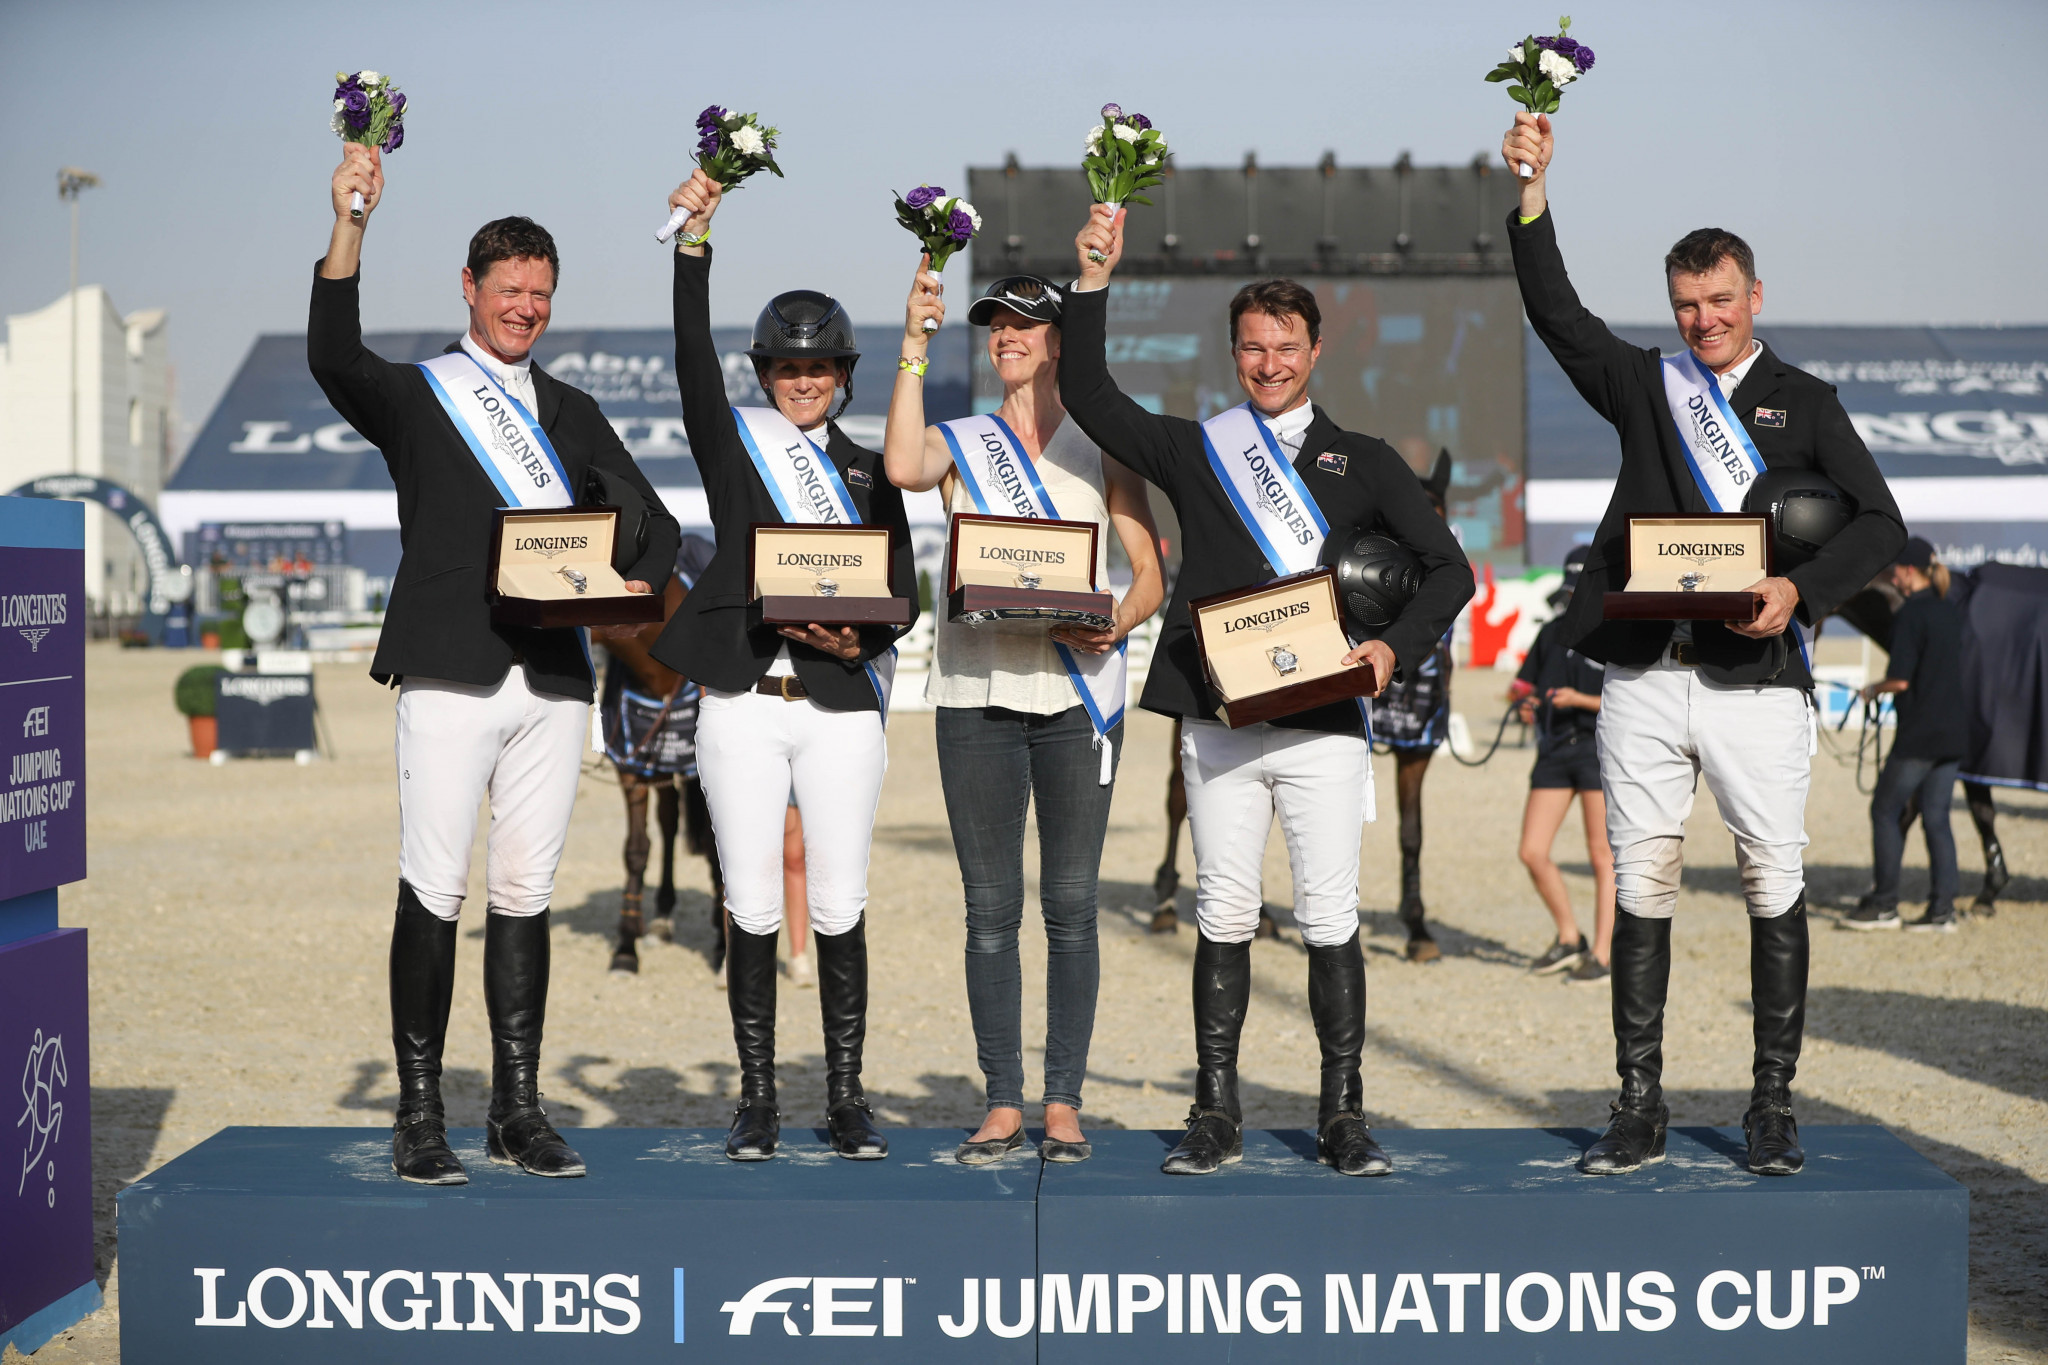 New Zealand come out on top in FEI Jumping Nations Cup in Abu Dhabi